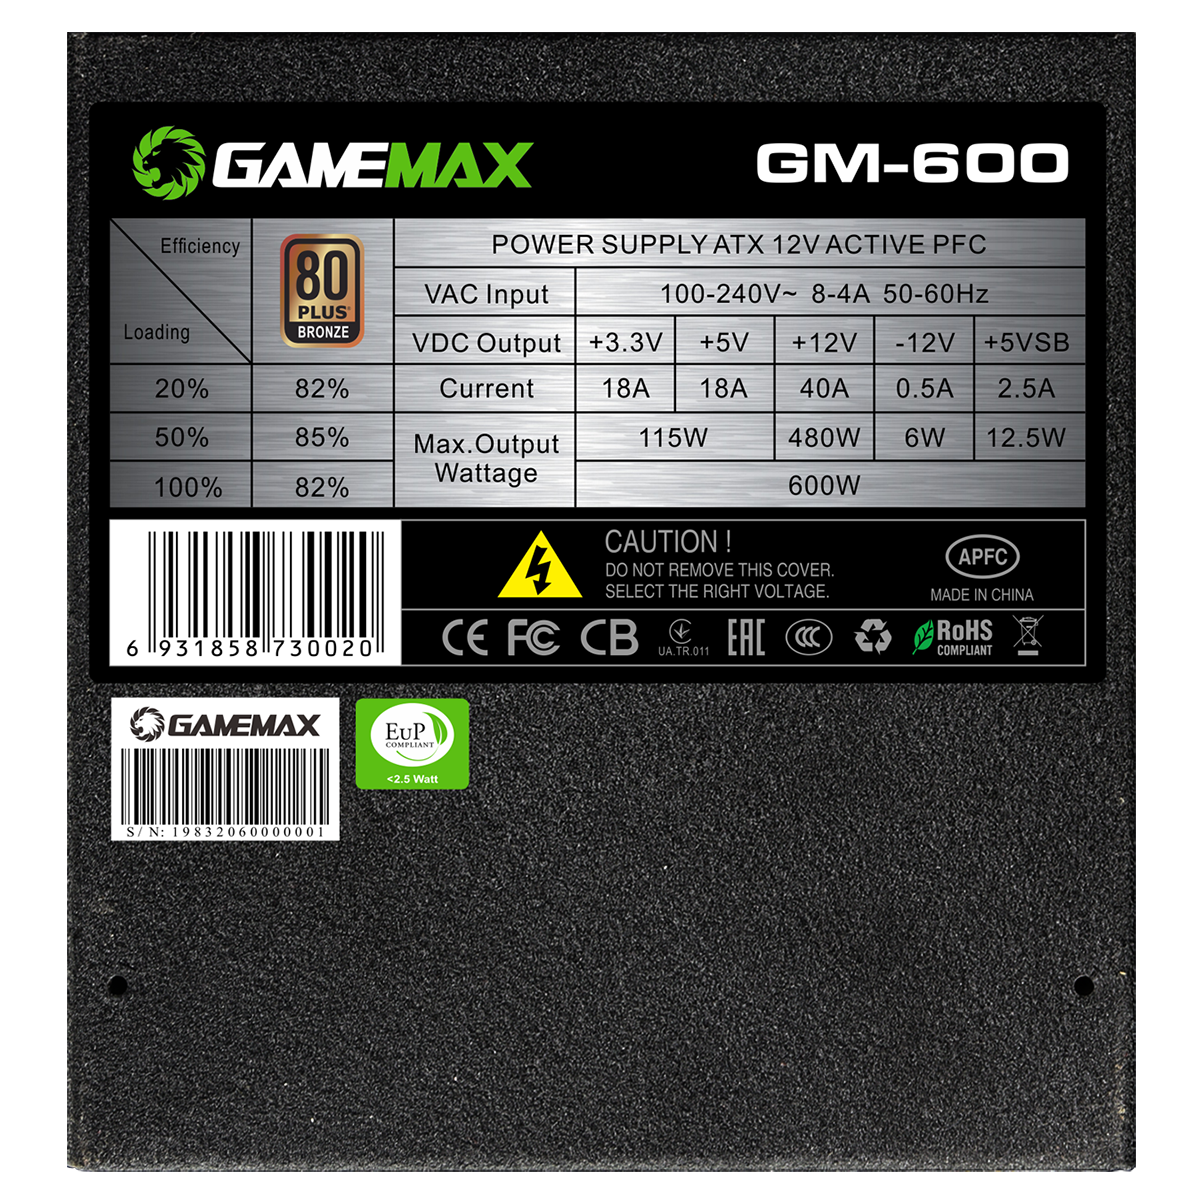 Build a PC for GAMEMAX GM-600B 600W (GM-600B) with compatibility check and  compare prices in Germany: Berlin, Munich, Dortmund on NerdPart